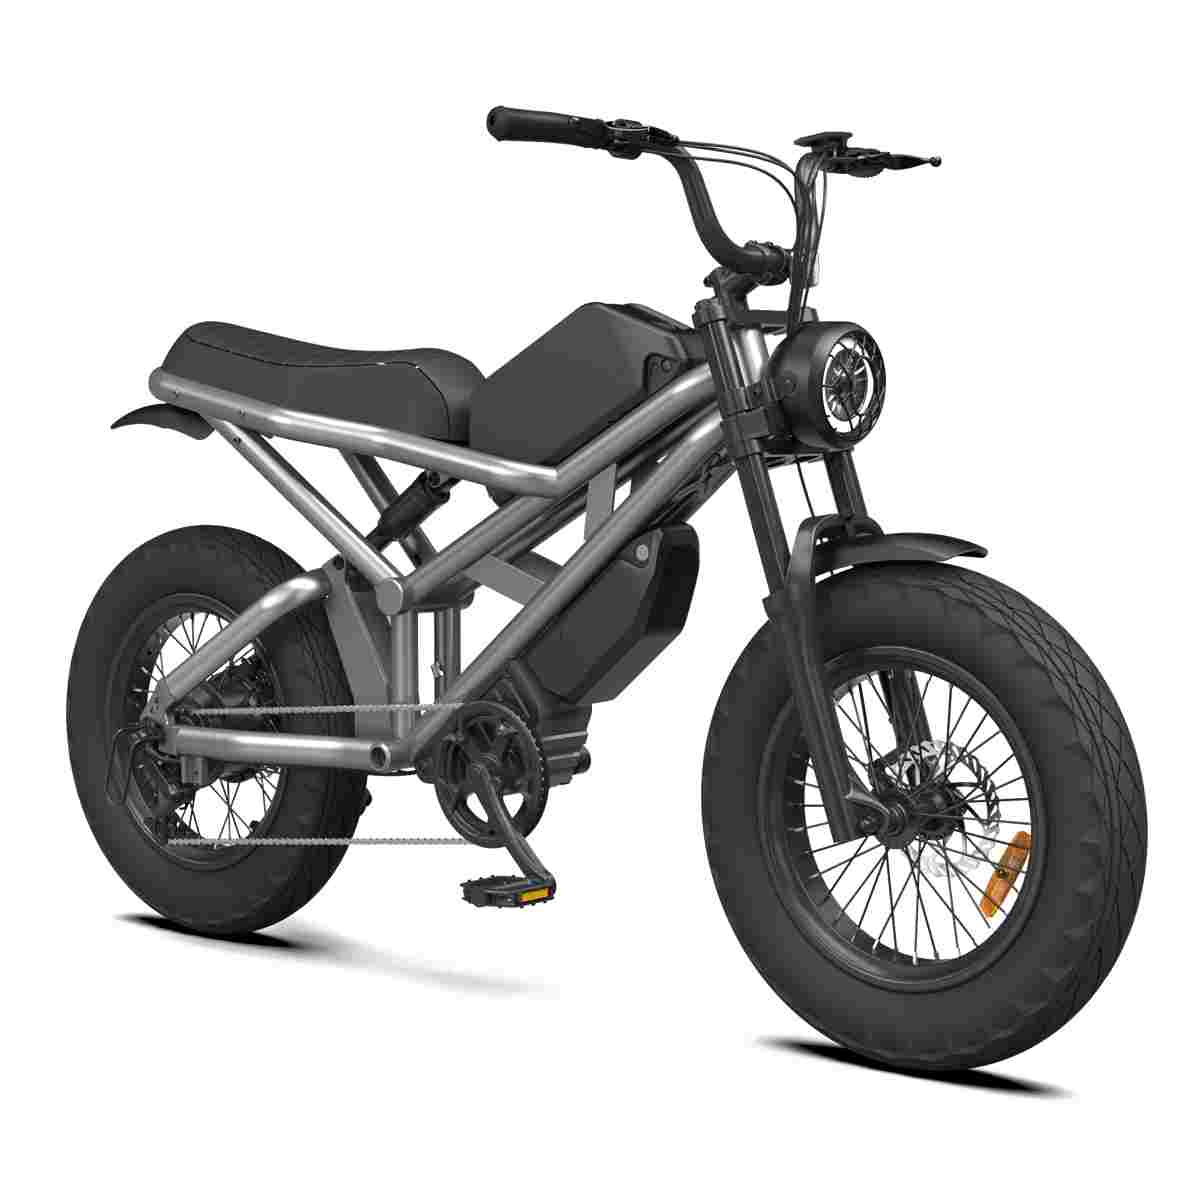 Full Electric Motorcycle wholesale price